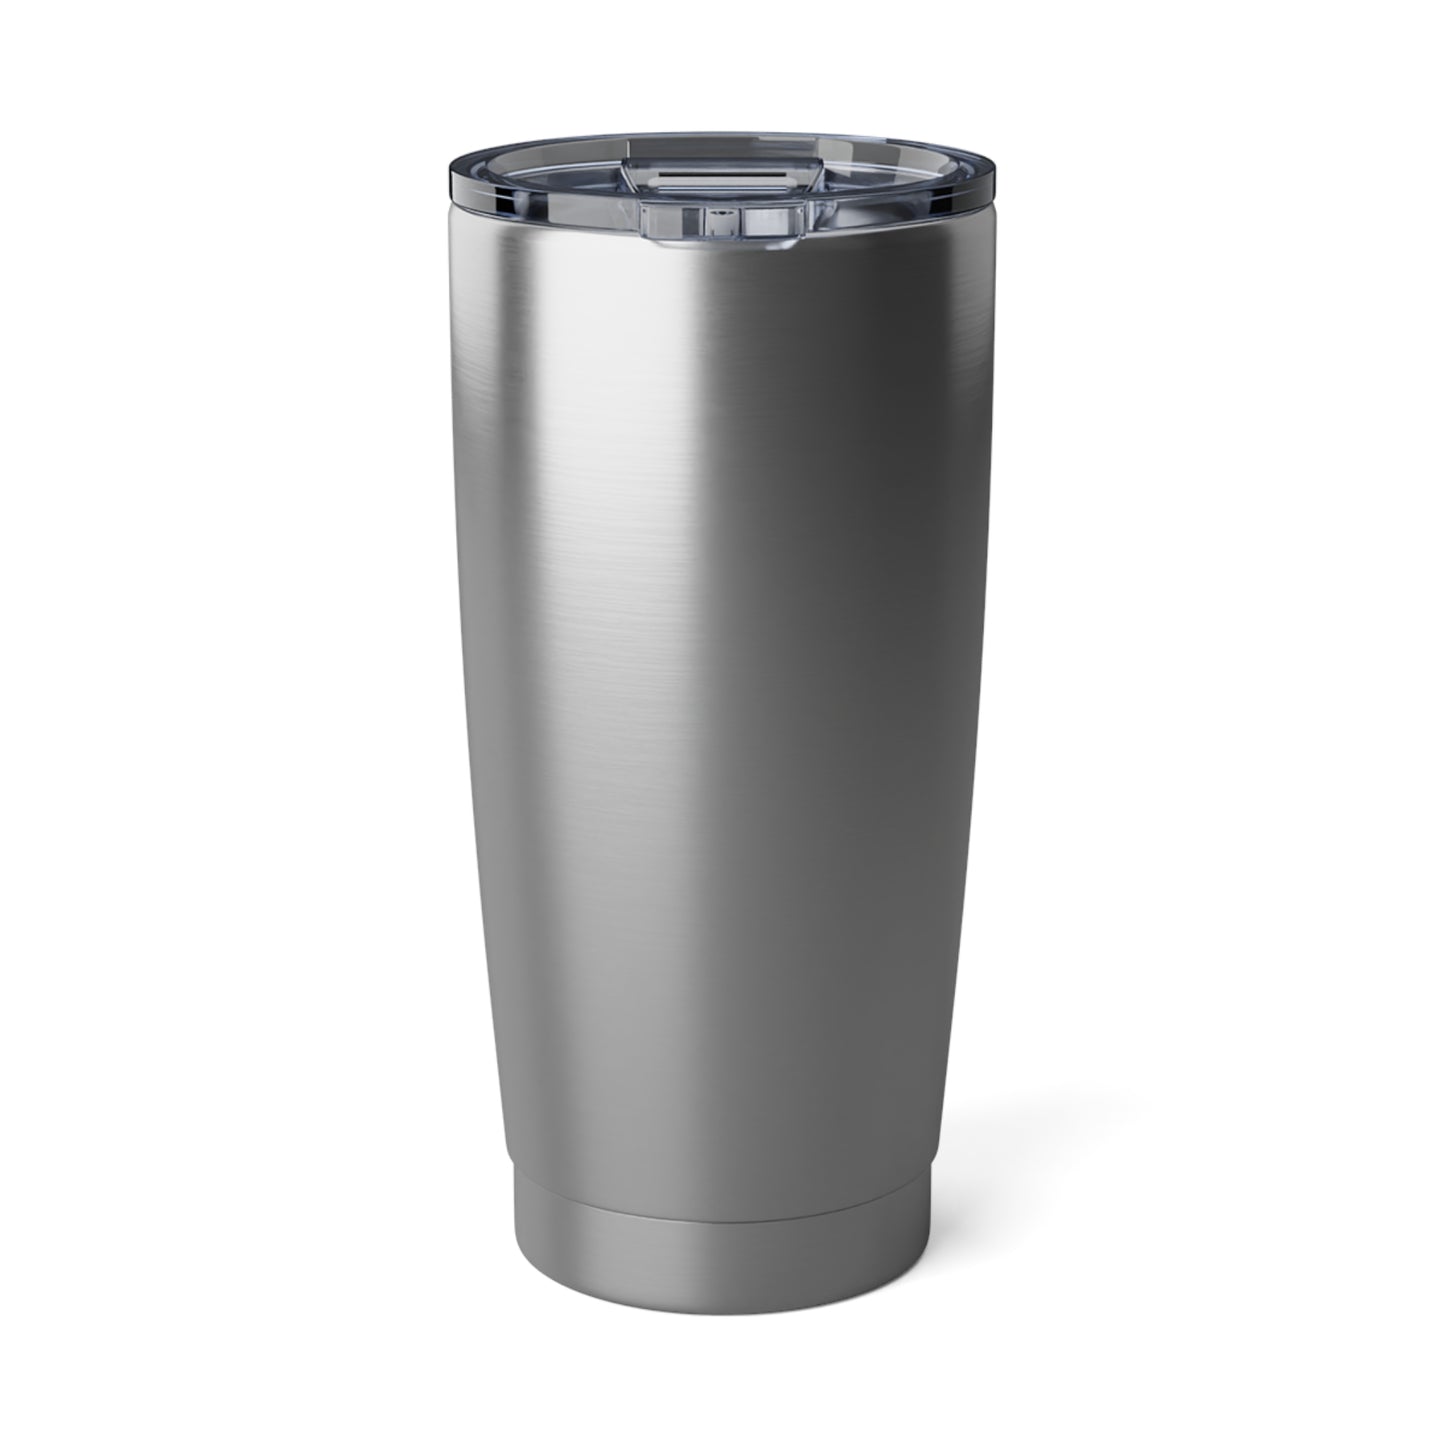 Michael Jordan Legacy Stainless Steel Tumbler - Double-Wall Insulated for Basketball Fans